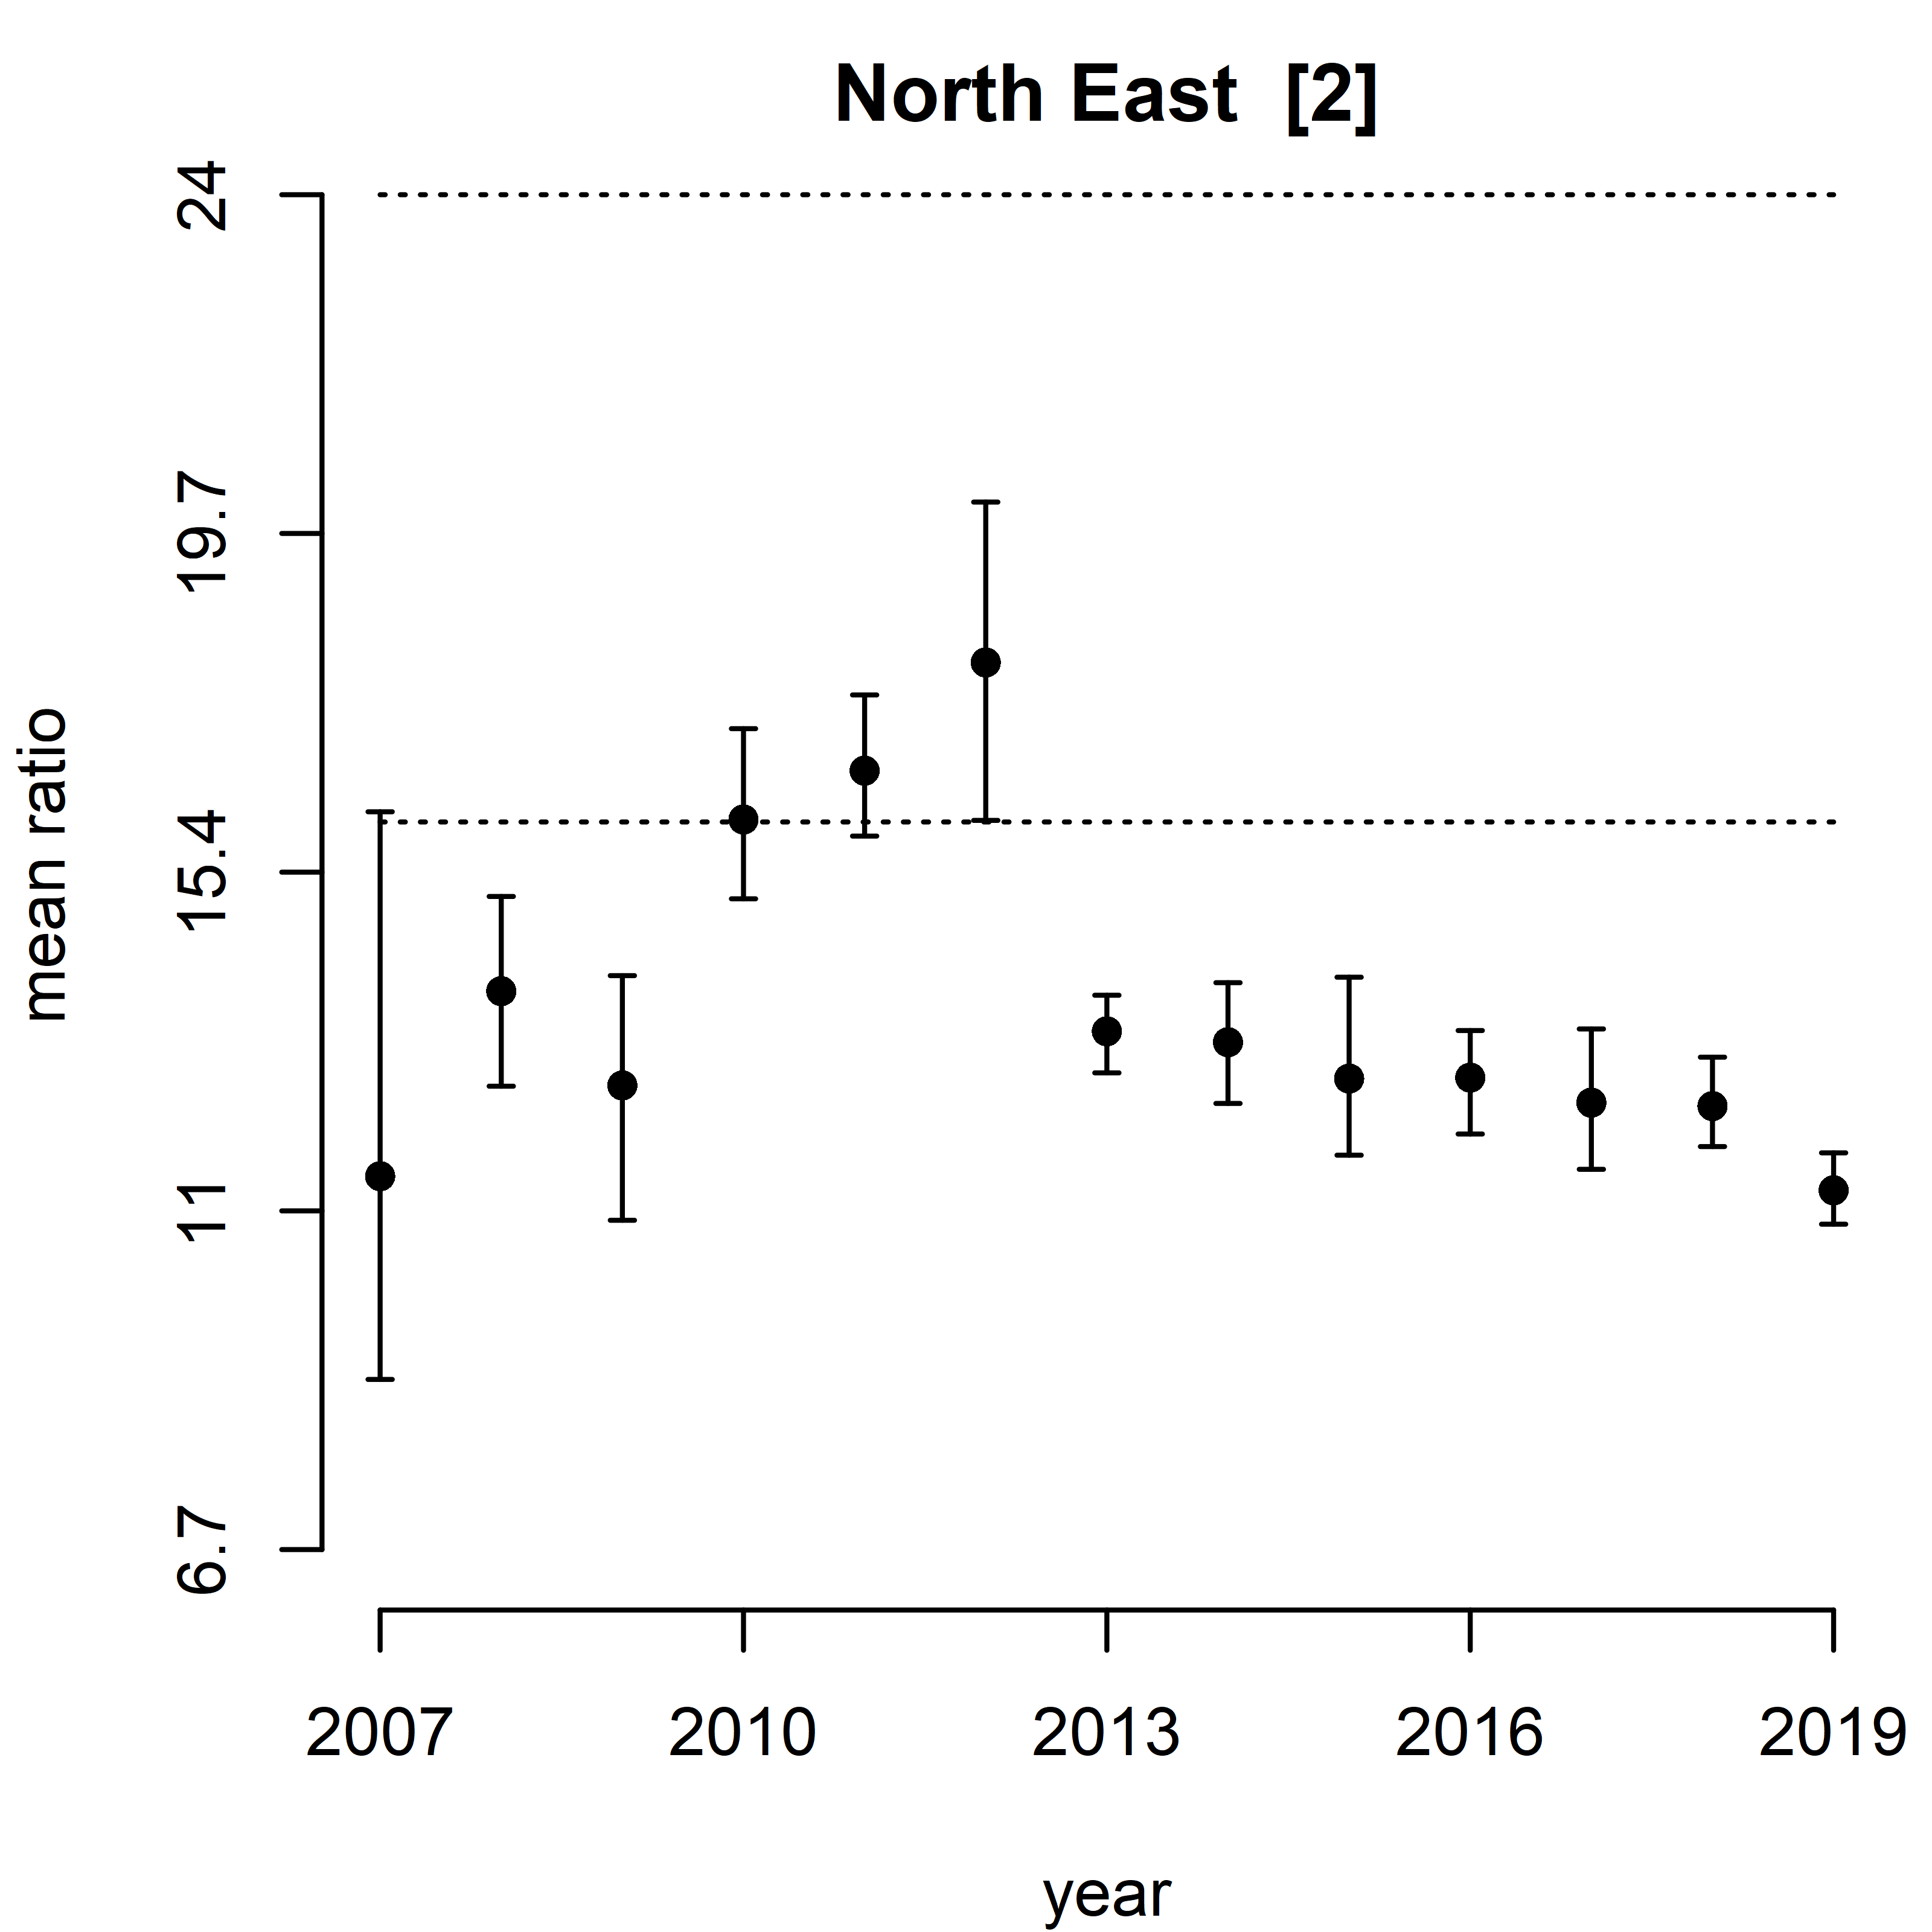 Figure k: Summary plot of predicted N/P ratios for winters 2007-2019 along with the predicted trend assessment for the time series (2007-2019). 